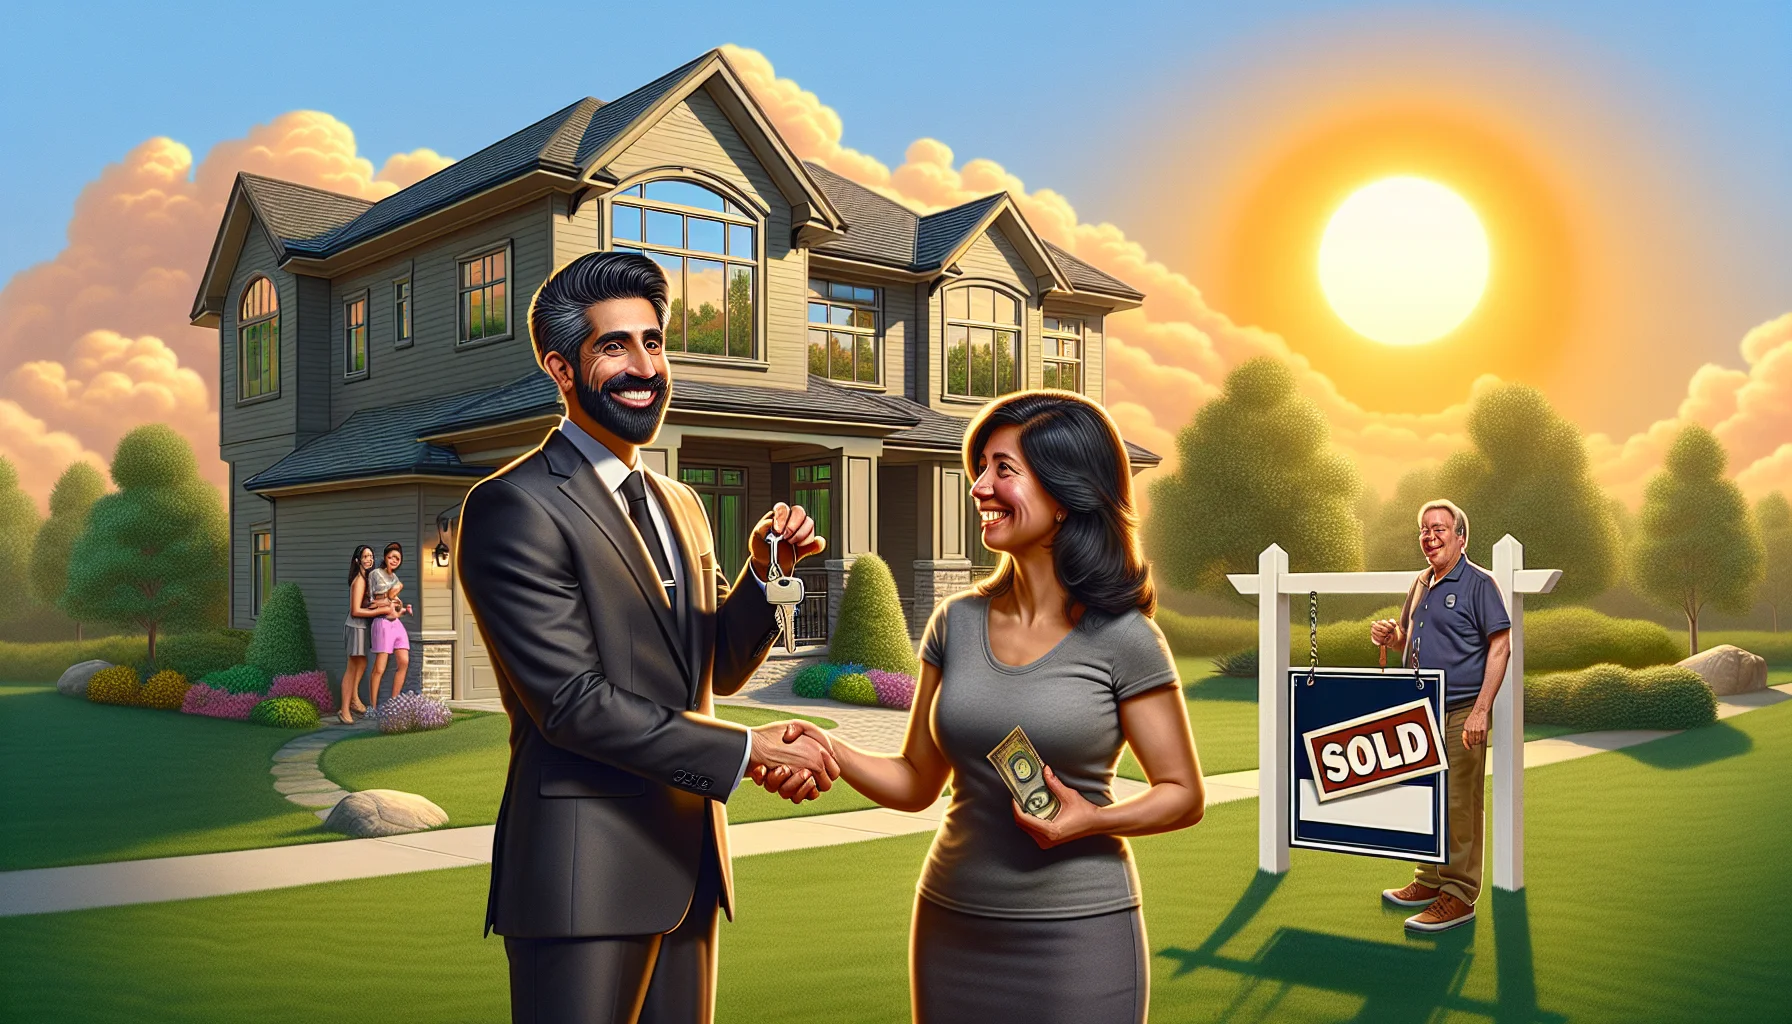 Create a humorous, hyper-realistic scene that represents the ideal conditions for real estate professionals. Picture this: A vibrant, sun-lit suburban neighborhood with immaculately kept lawns and a ‘Sold’ sign hanging proudly outside a stunning, modern house. A Middle-Eastern male realtor with a radiant smile handing over the keys to a jubilant Hispanic female, who is holding the deed to the house. In the background, a Caucasian couple is admiring another lovely house across the street with a 'For Sale' sign, signaling more business in the pipeline. The sky is clear and warm, symbolizing the brightness and positivity in the real estate market.